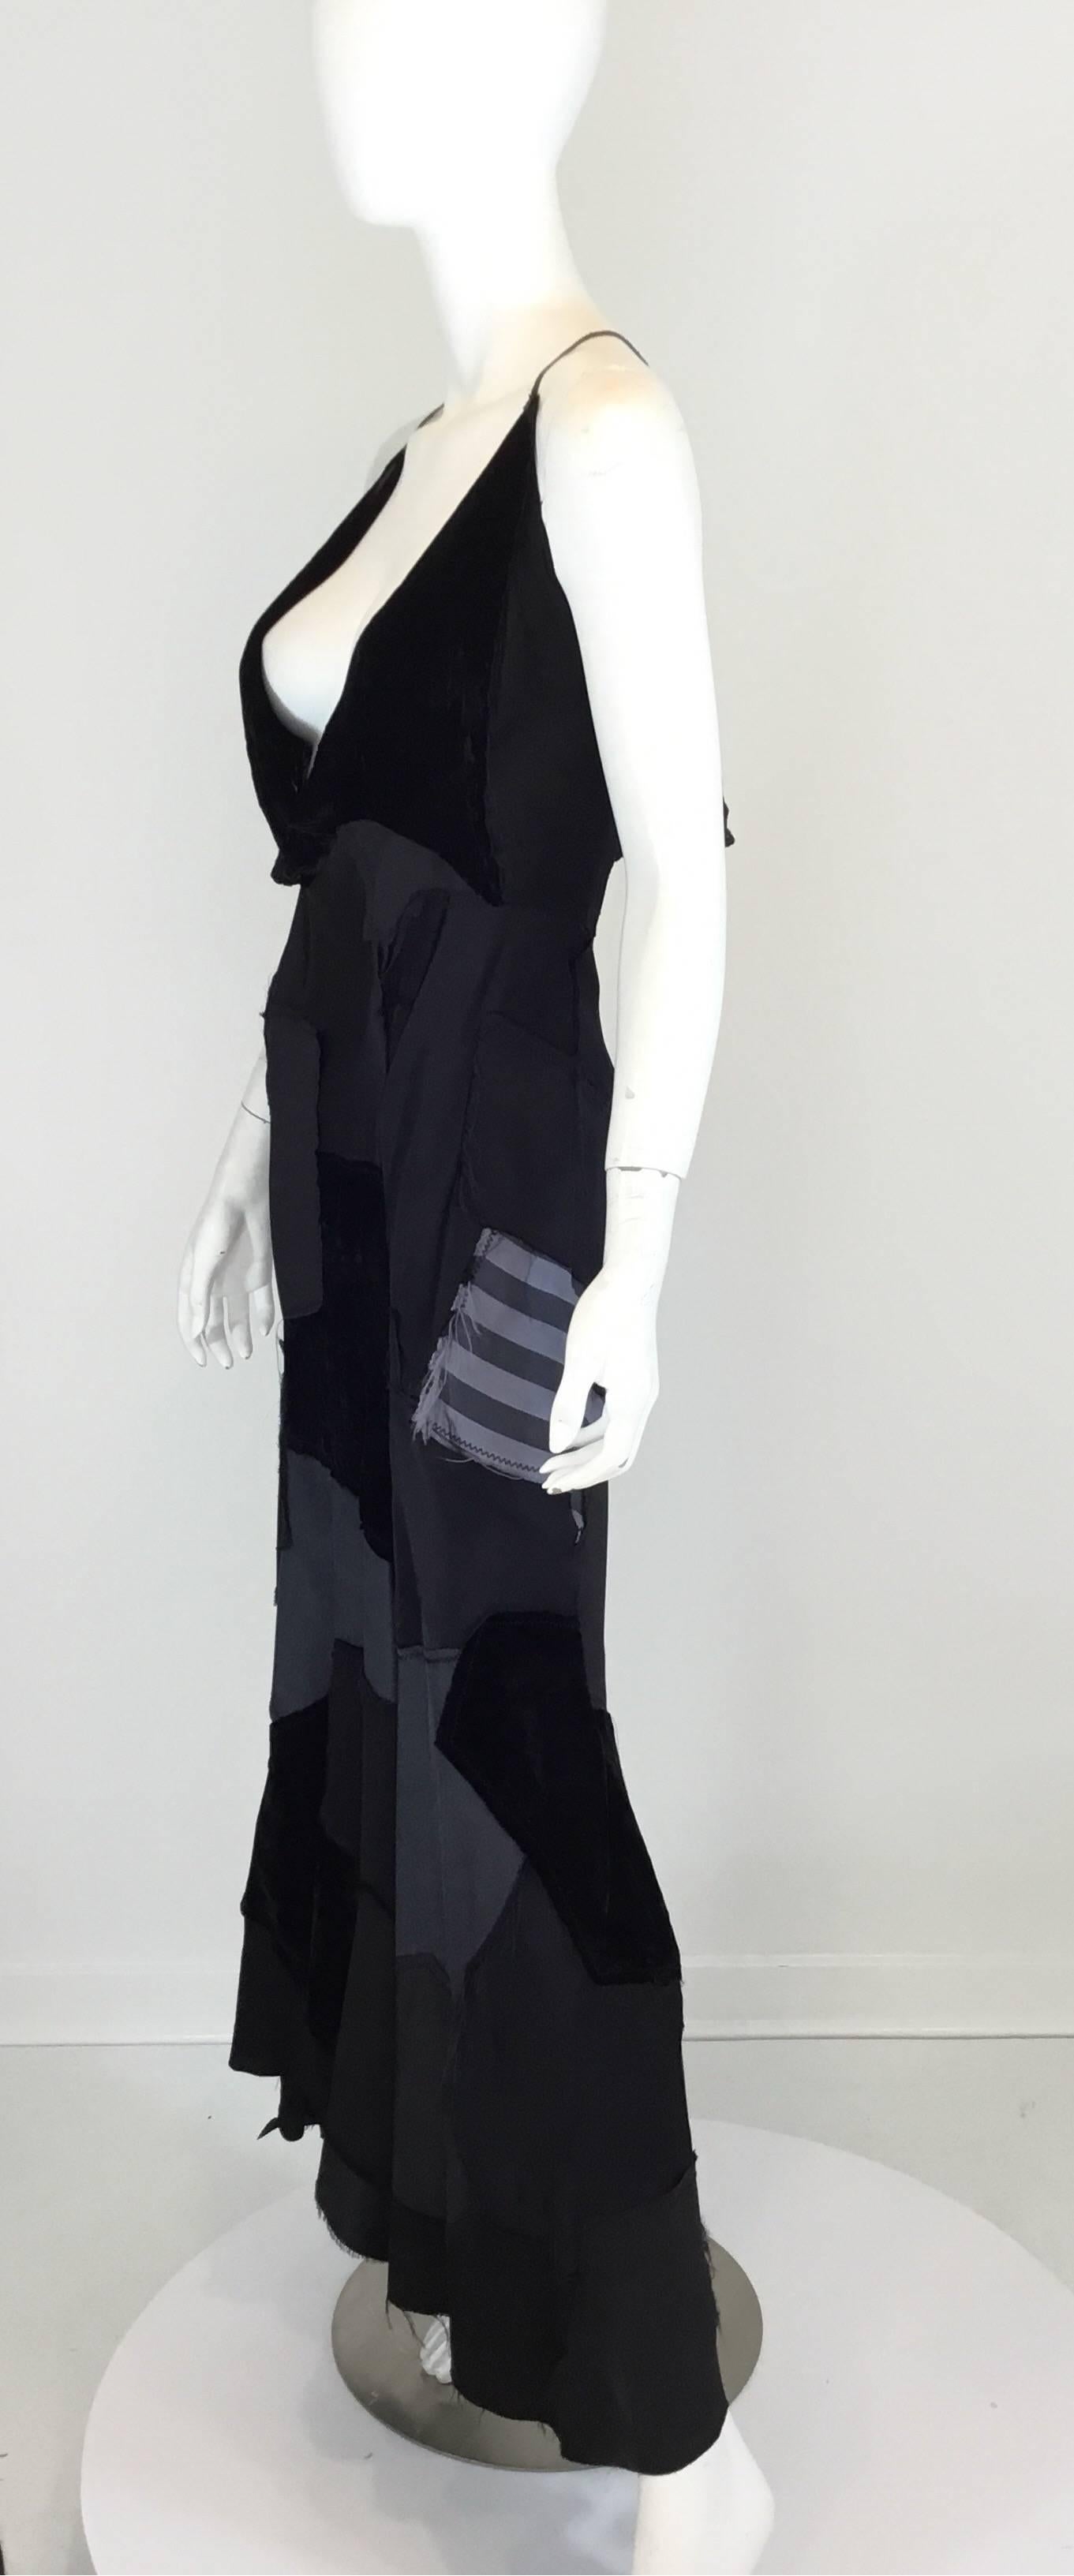 Junya Watanabe slip dress from the 2002 Runway features a patchwork design throughout, silk and velvet fabric, back zipper and hook and eye fastening, flat leather shoulder straps. Labeled a size M, made of 50% polyester, 42% rayon, and 9% silk.